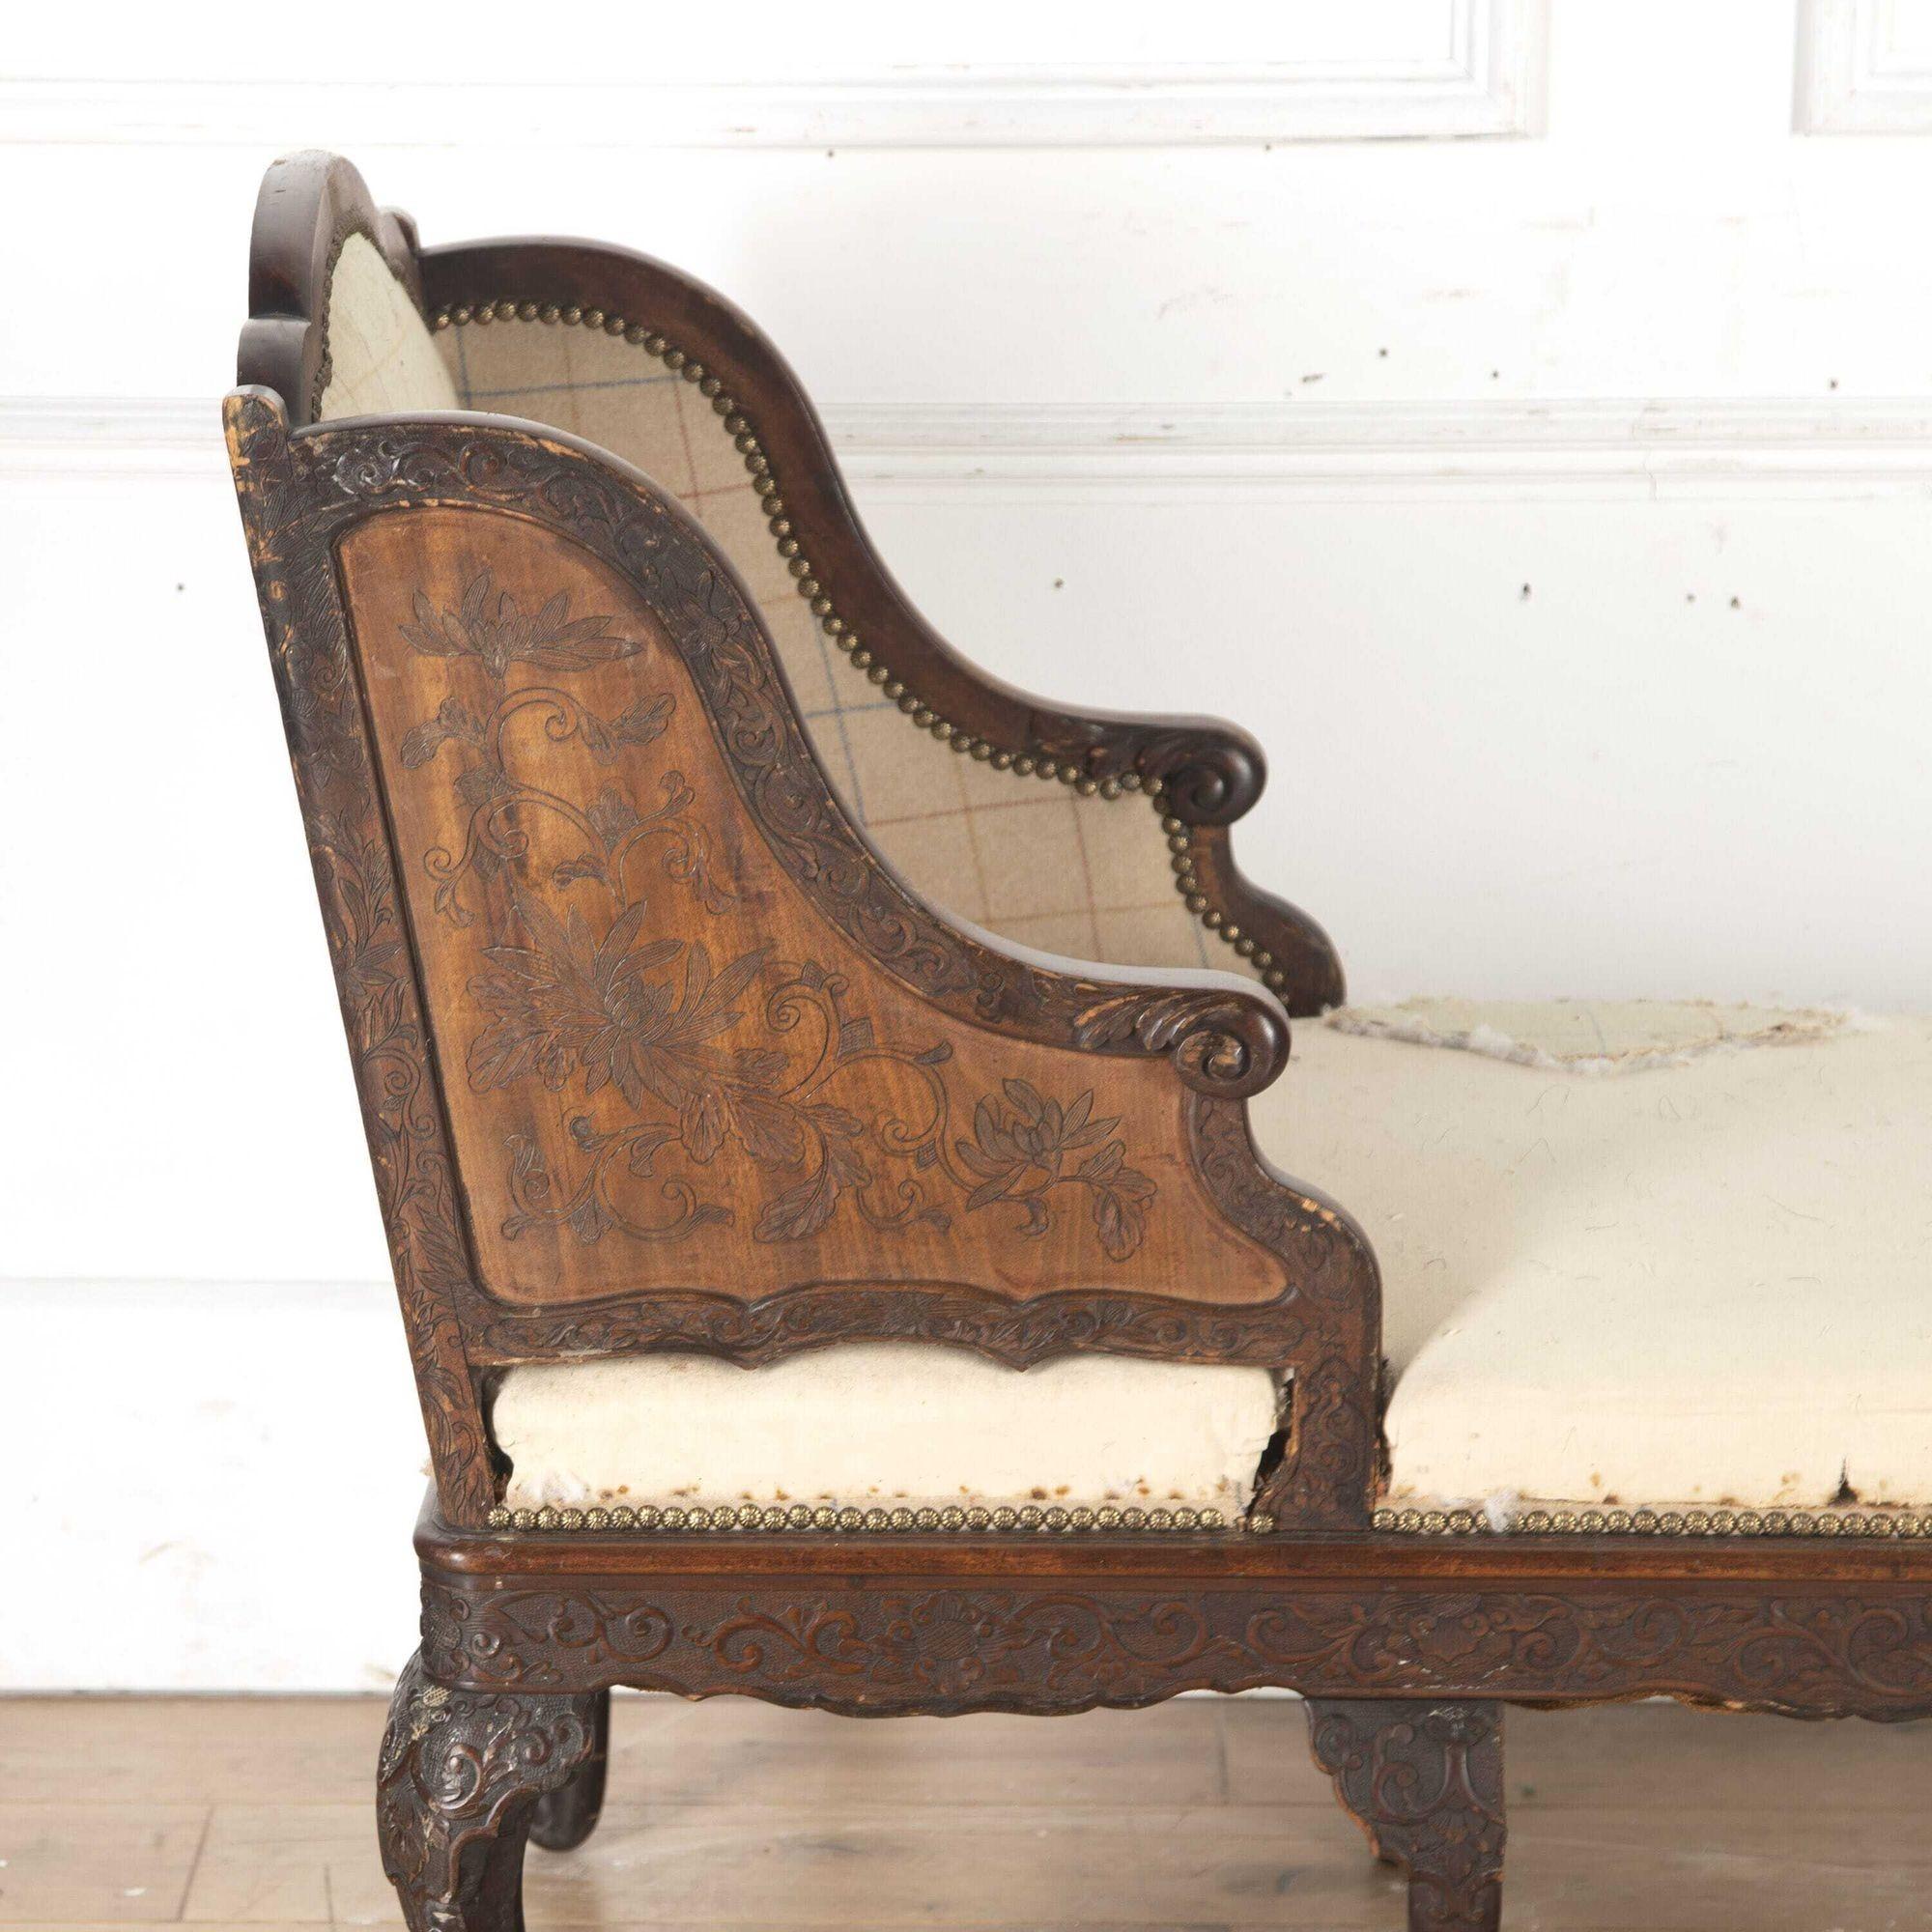 China Trade Carved Daybed For Sale 1